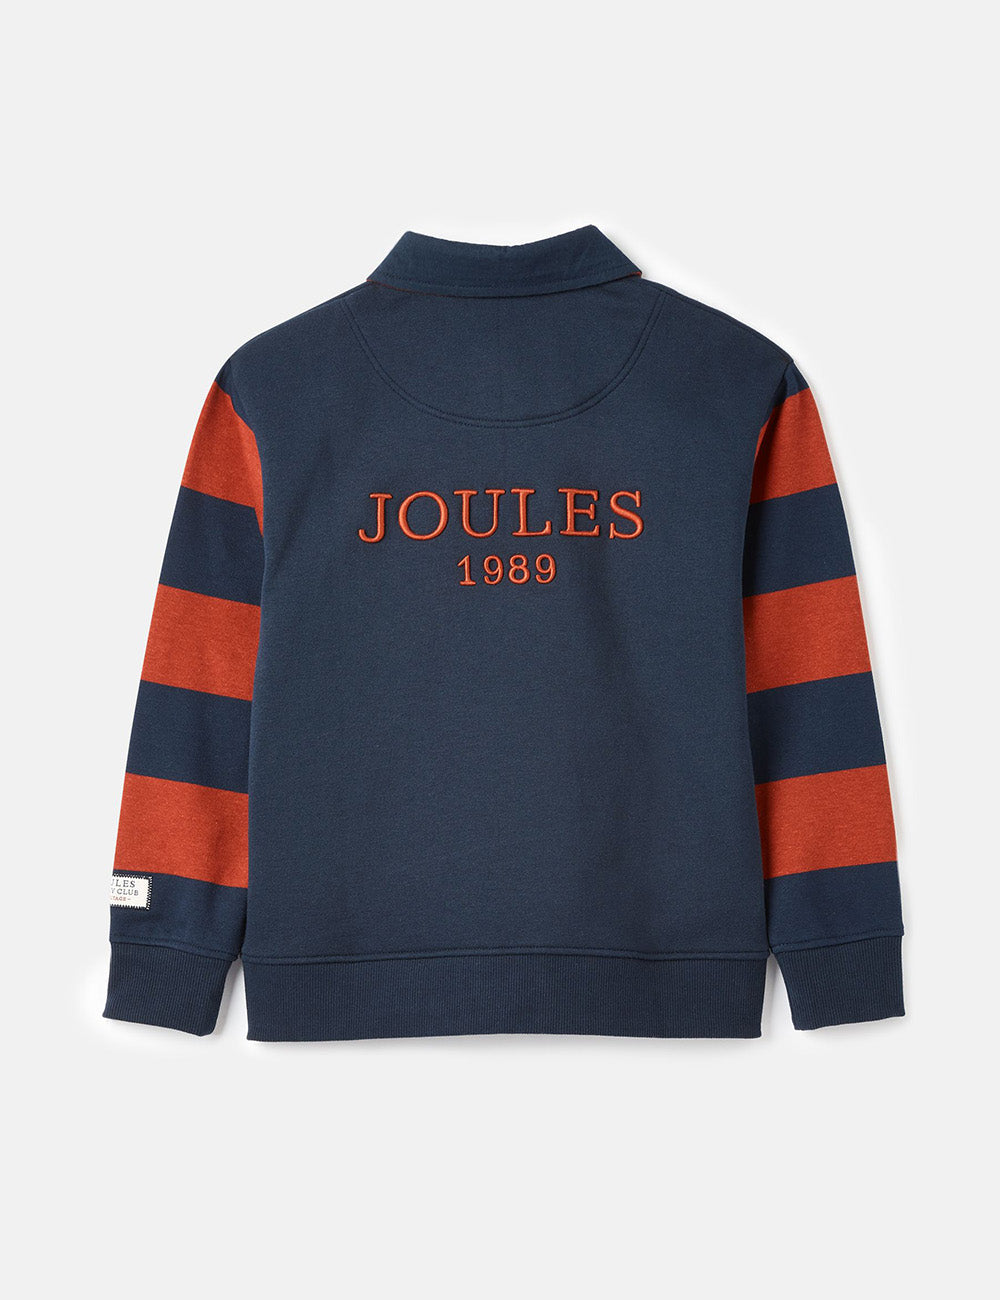 Joules Try Rugby Sweatshirt - French Navy